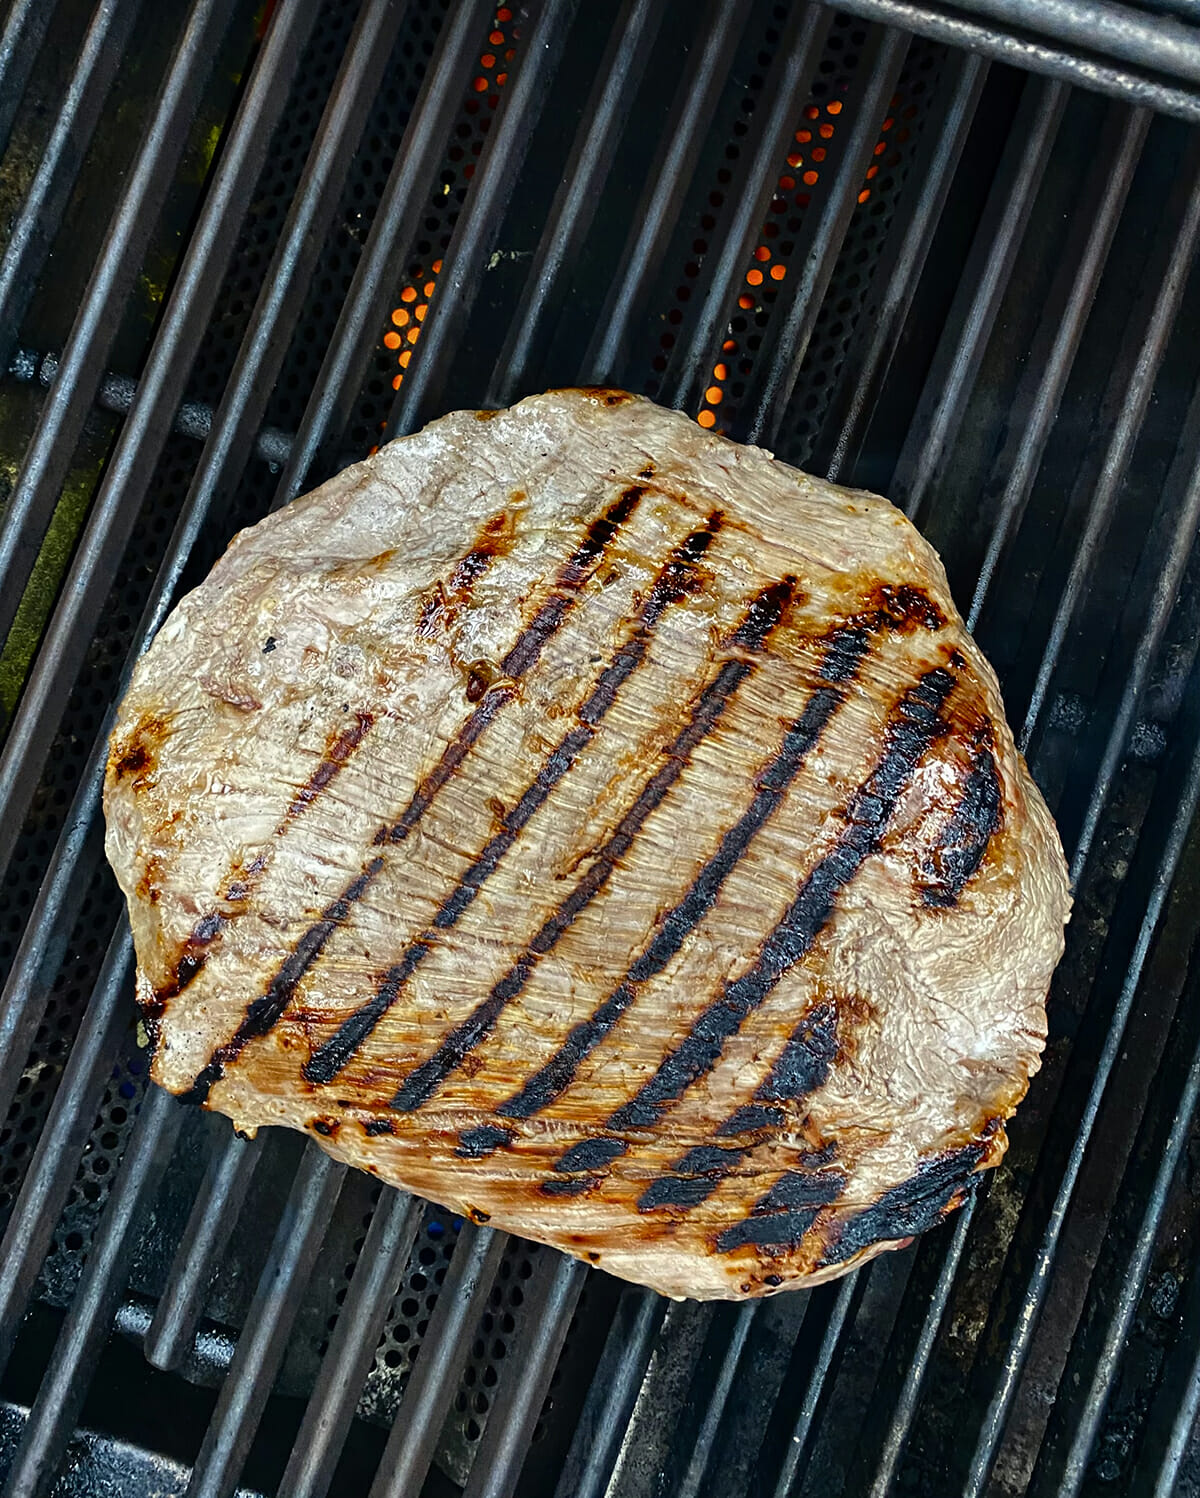 Buttermilk steak cooking on the grill.